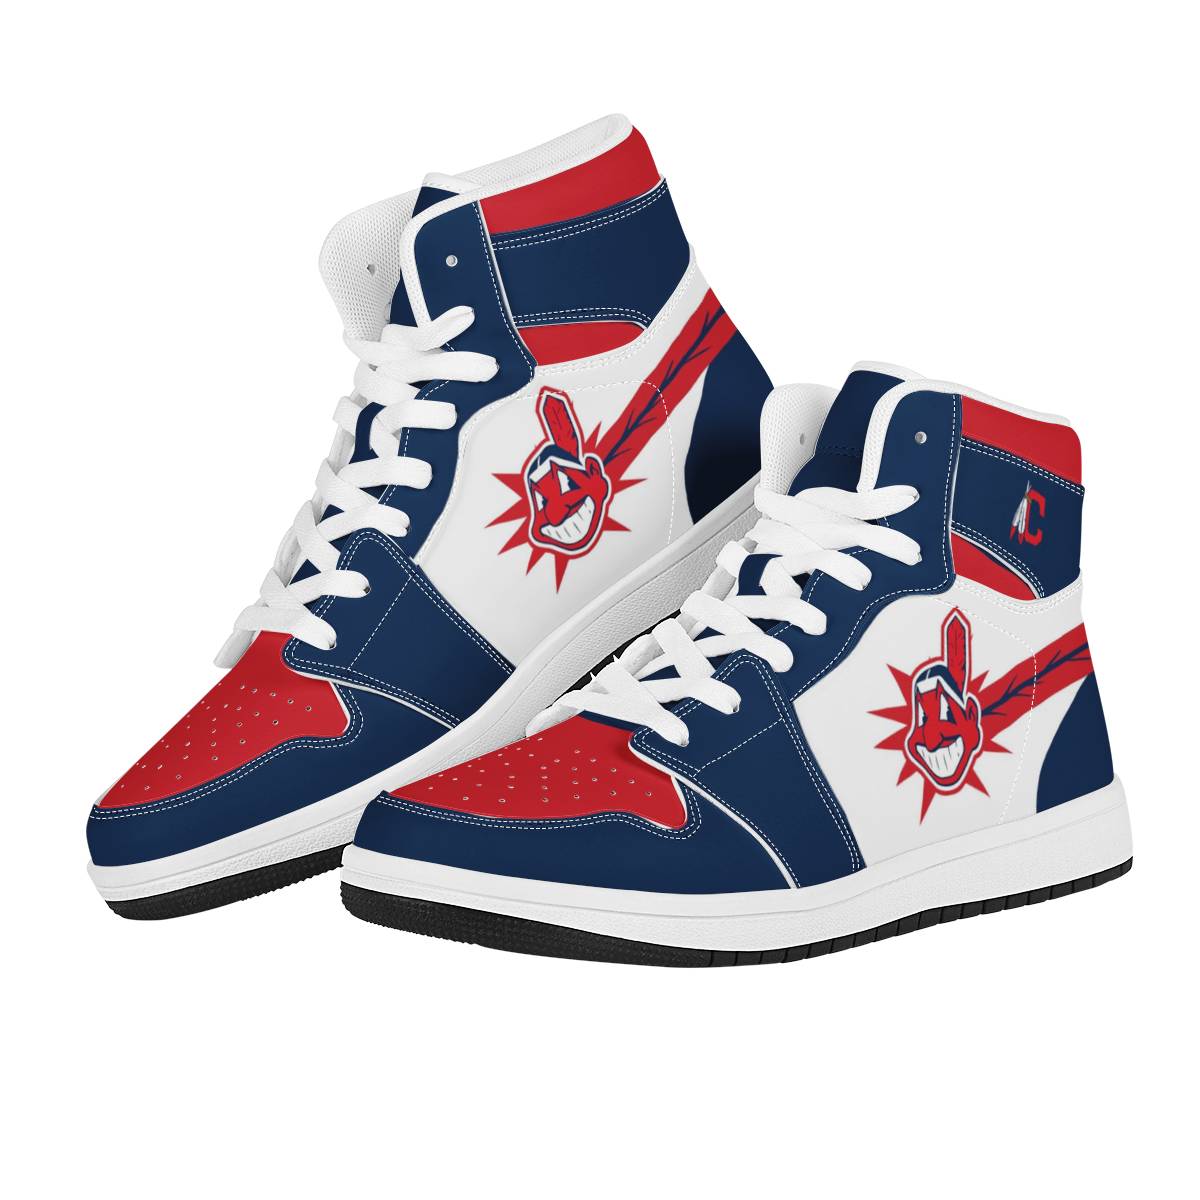 Men's Cleveland Indians High Top Leather AJ1 Sneakers 002